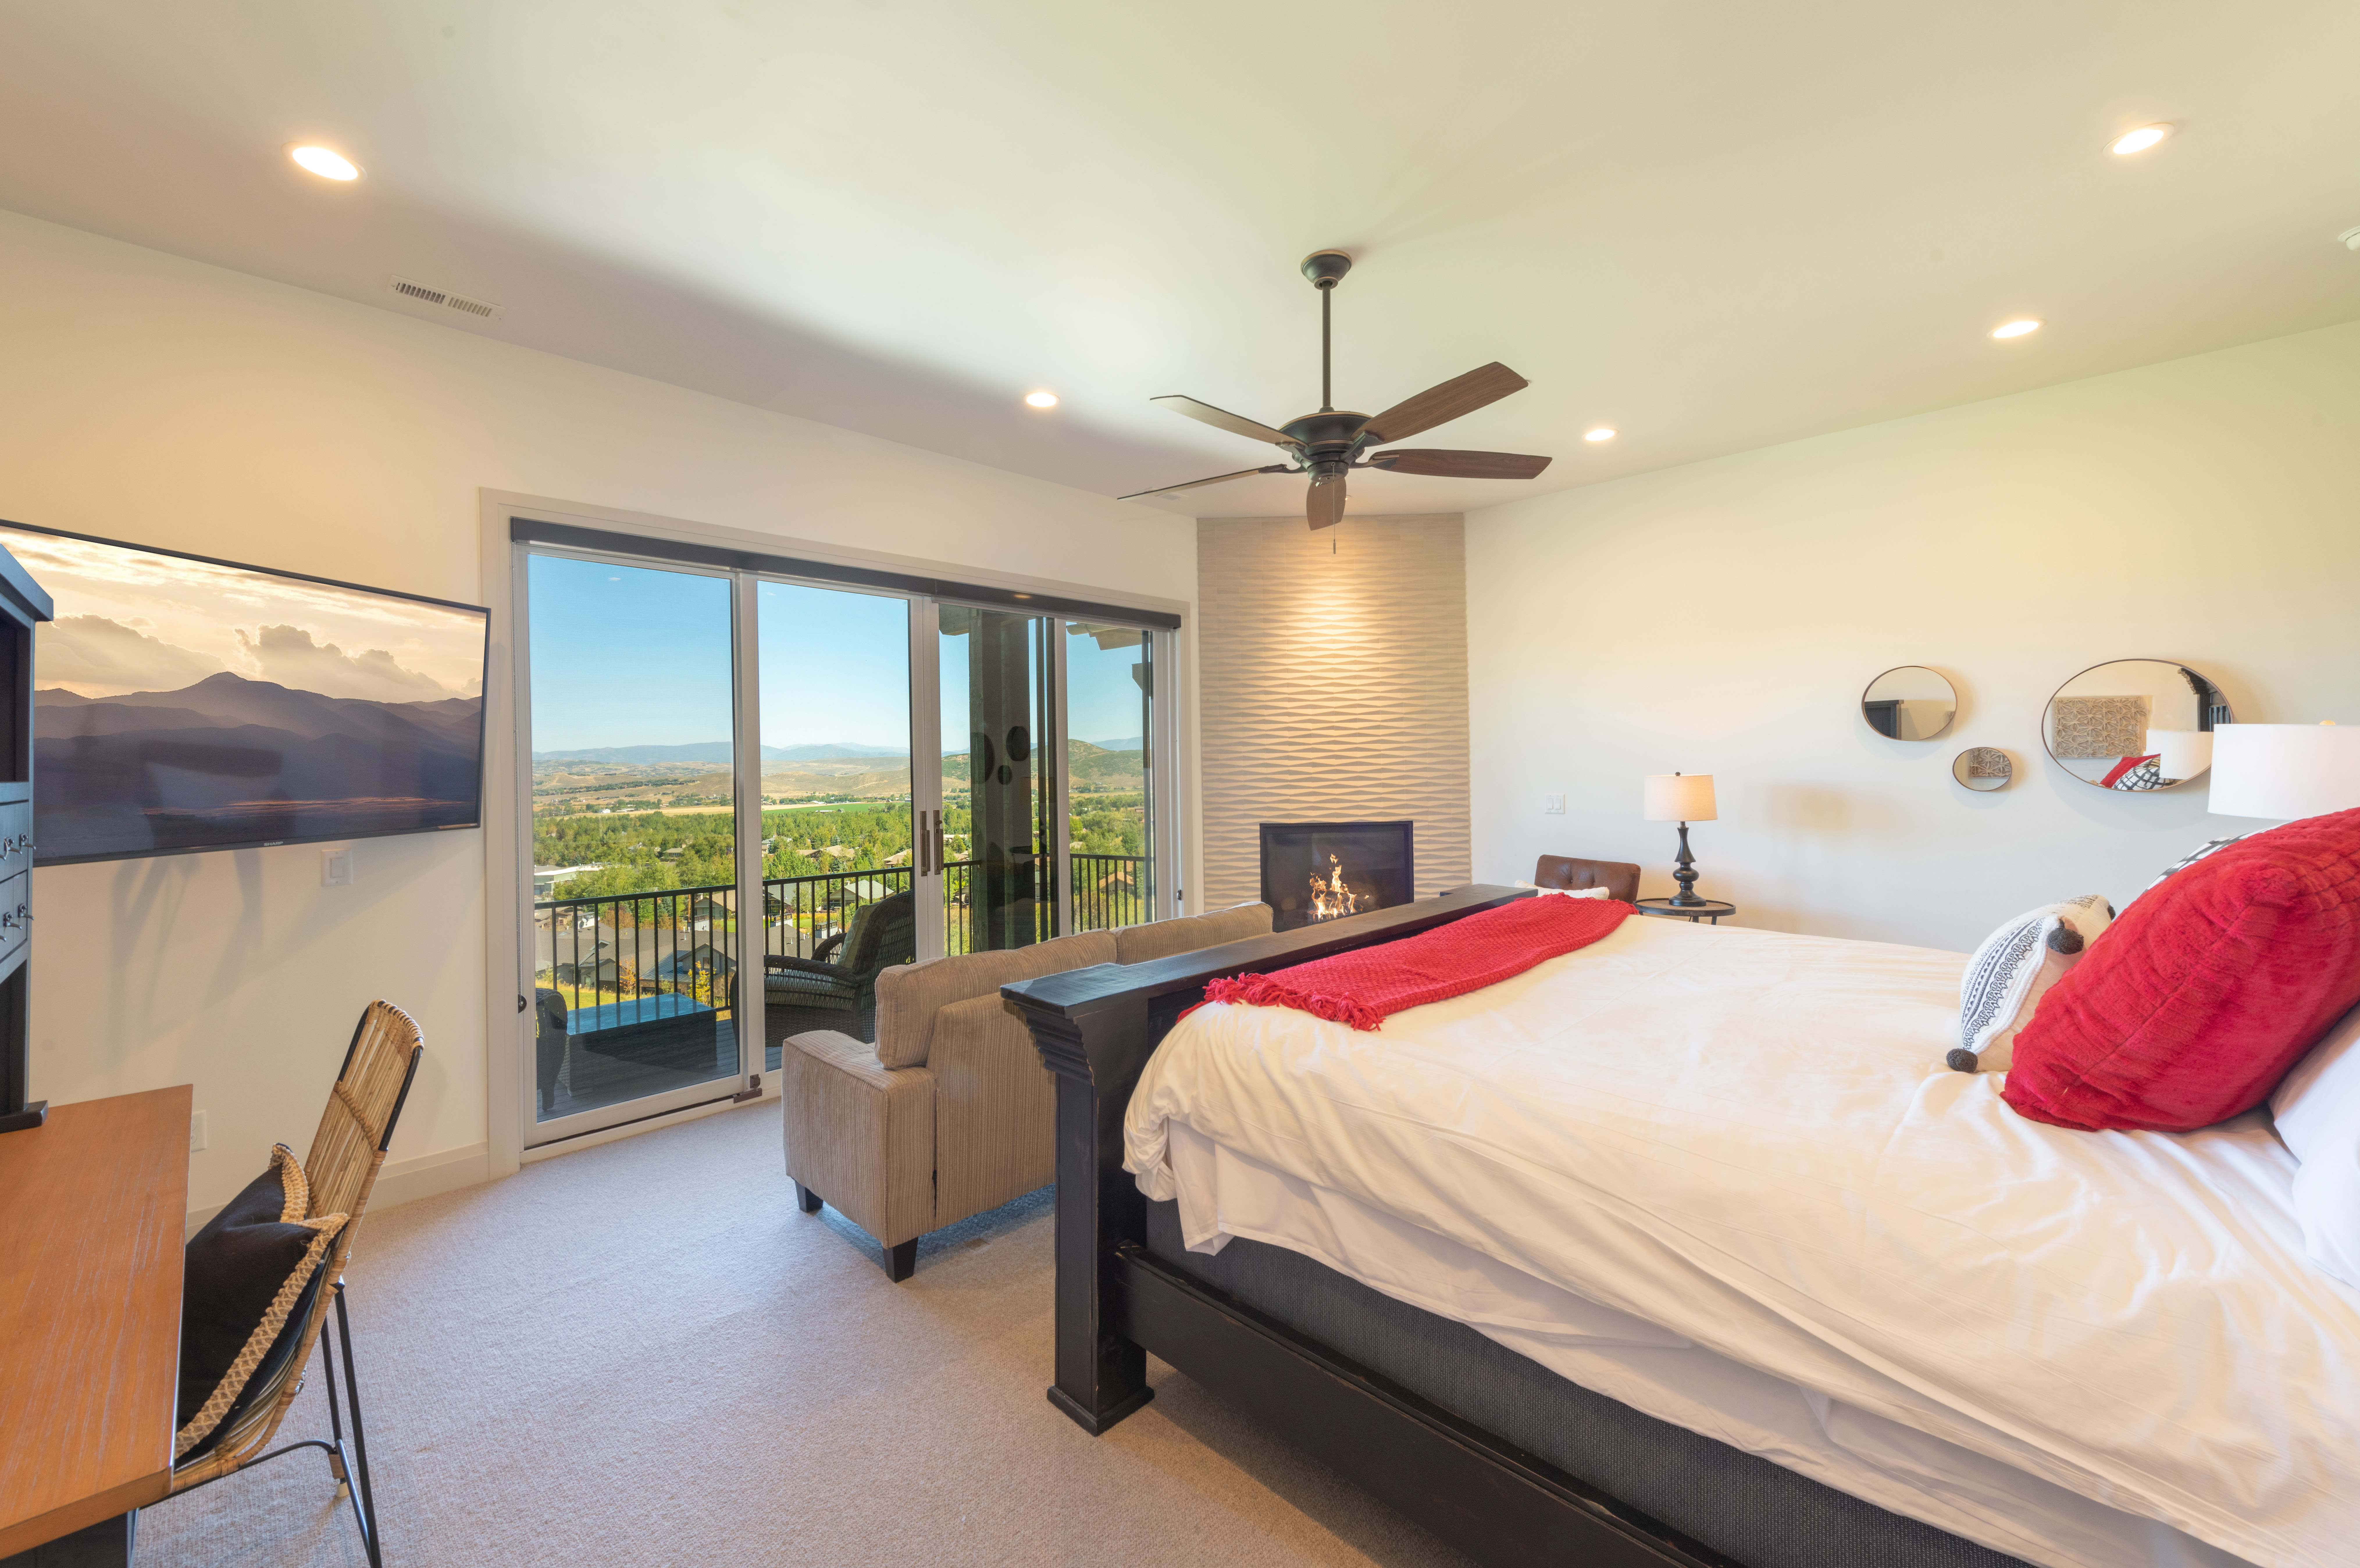 Master bedroom has king bed, fireplace, private balcony, views of golf course and valley